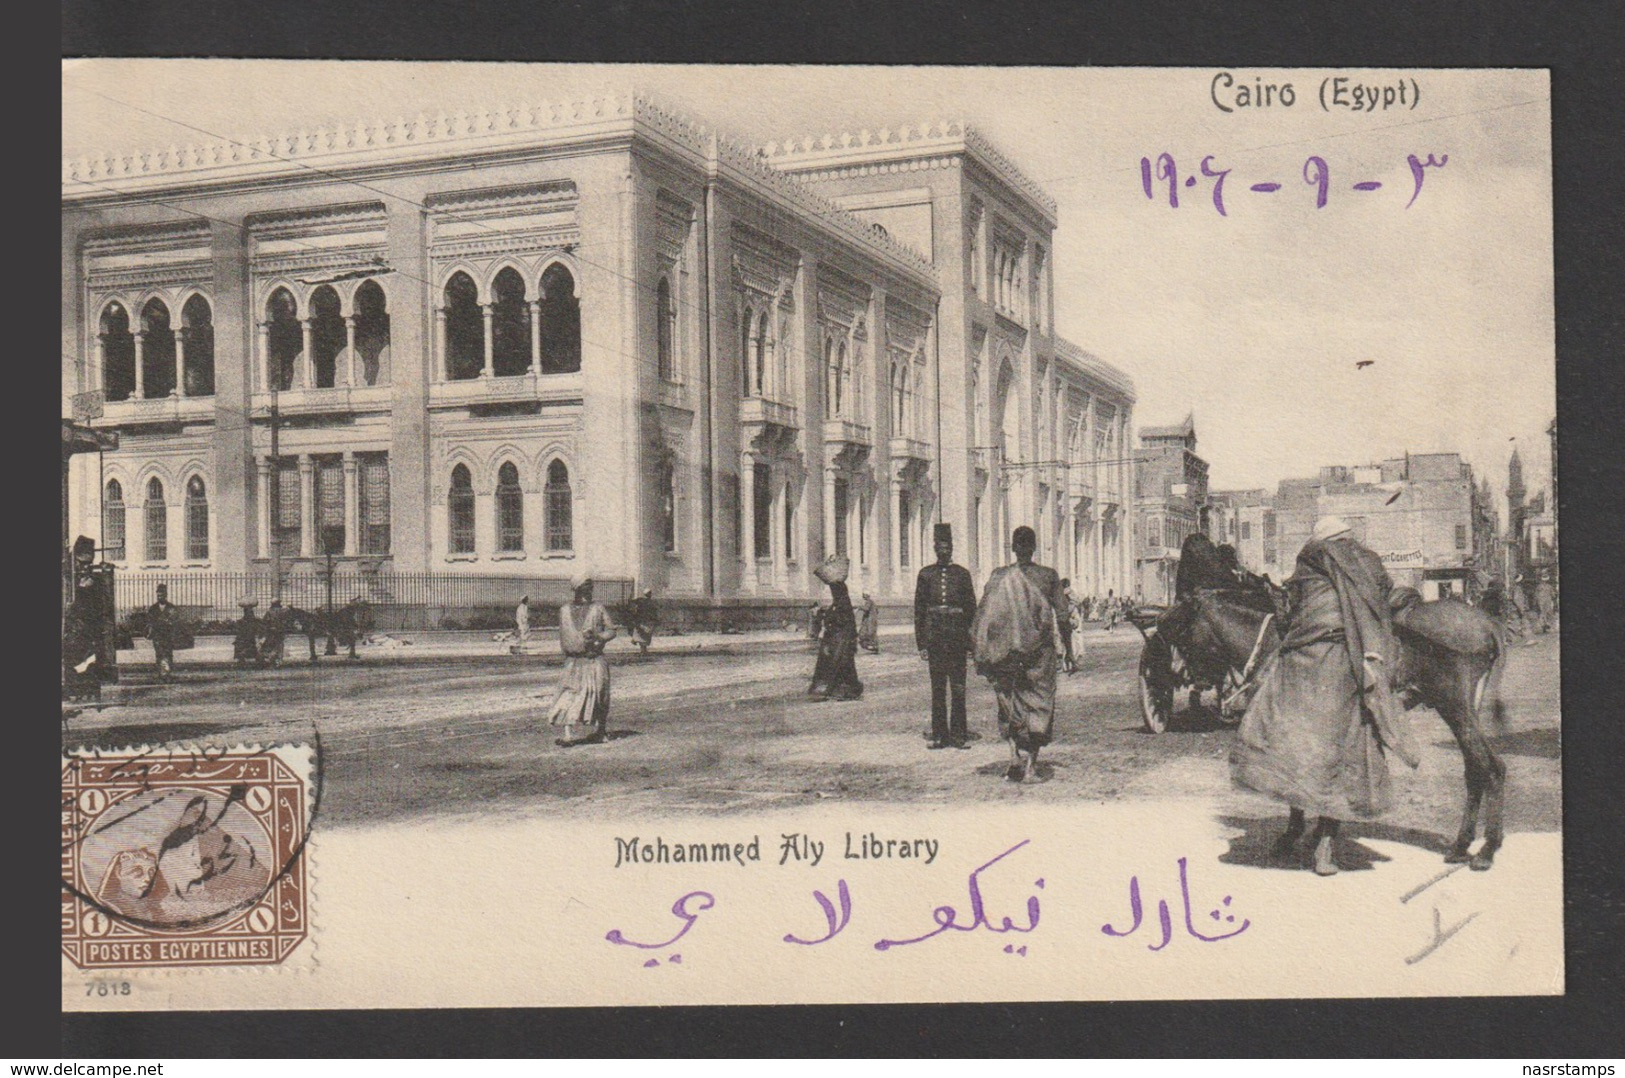 Egypt - 1906 - Very Rare - Vintage Post Card - Mohamed Aly Library - Cairo - 1866-1914 Khedivate Of Egypt